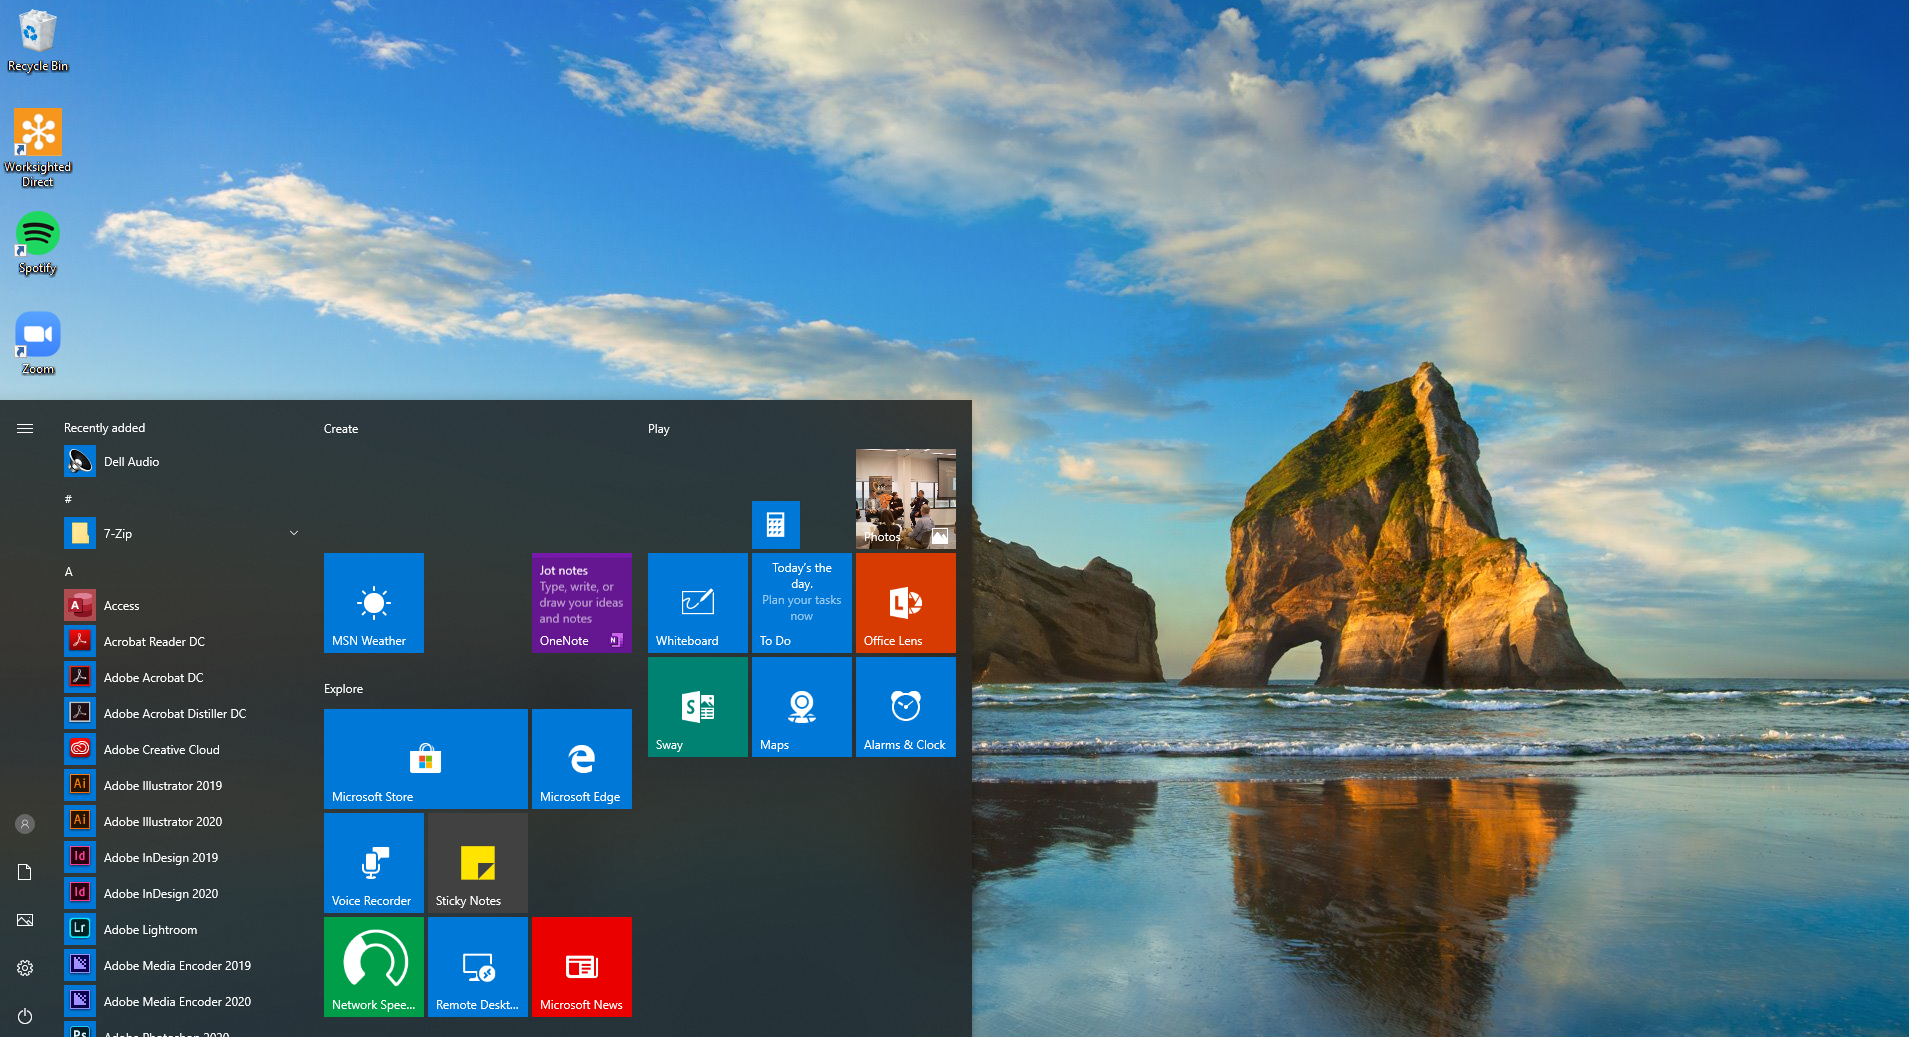 5 Things I Love About Windows 10